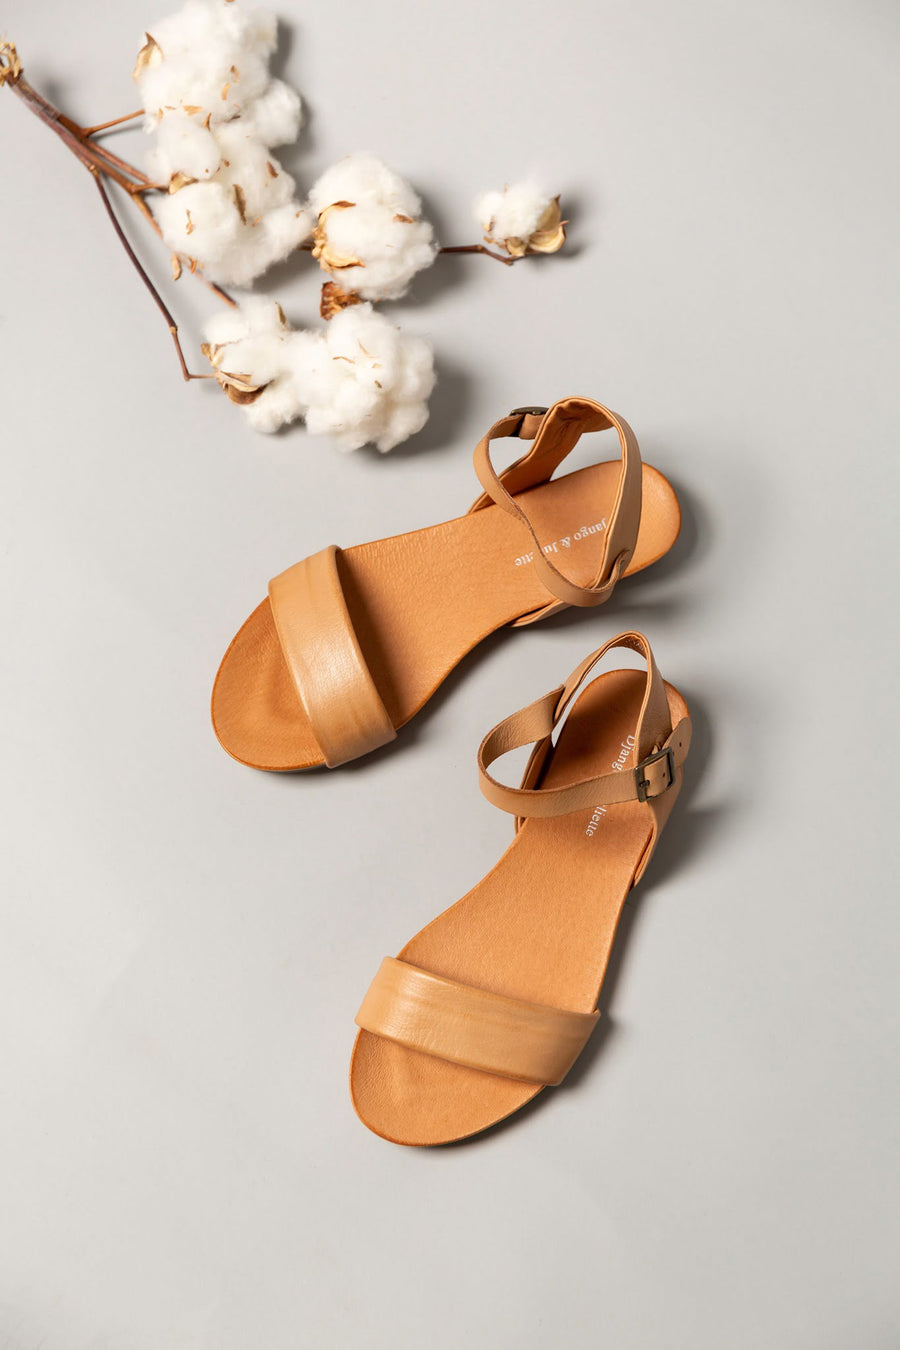 Beautiful, tan Django & Juliette sandals resting on a grey table, with white flowers beside them.